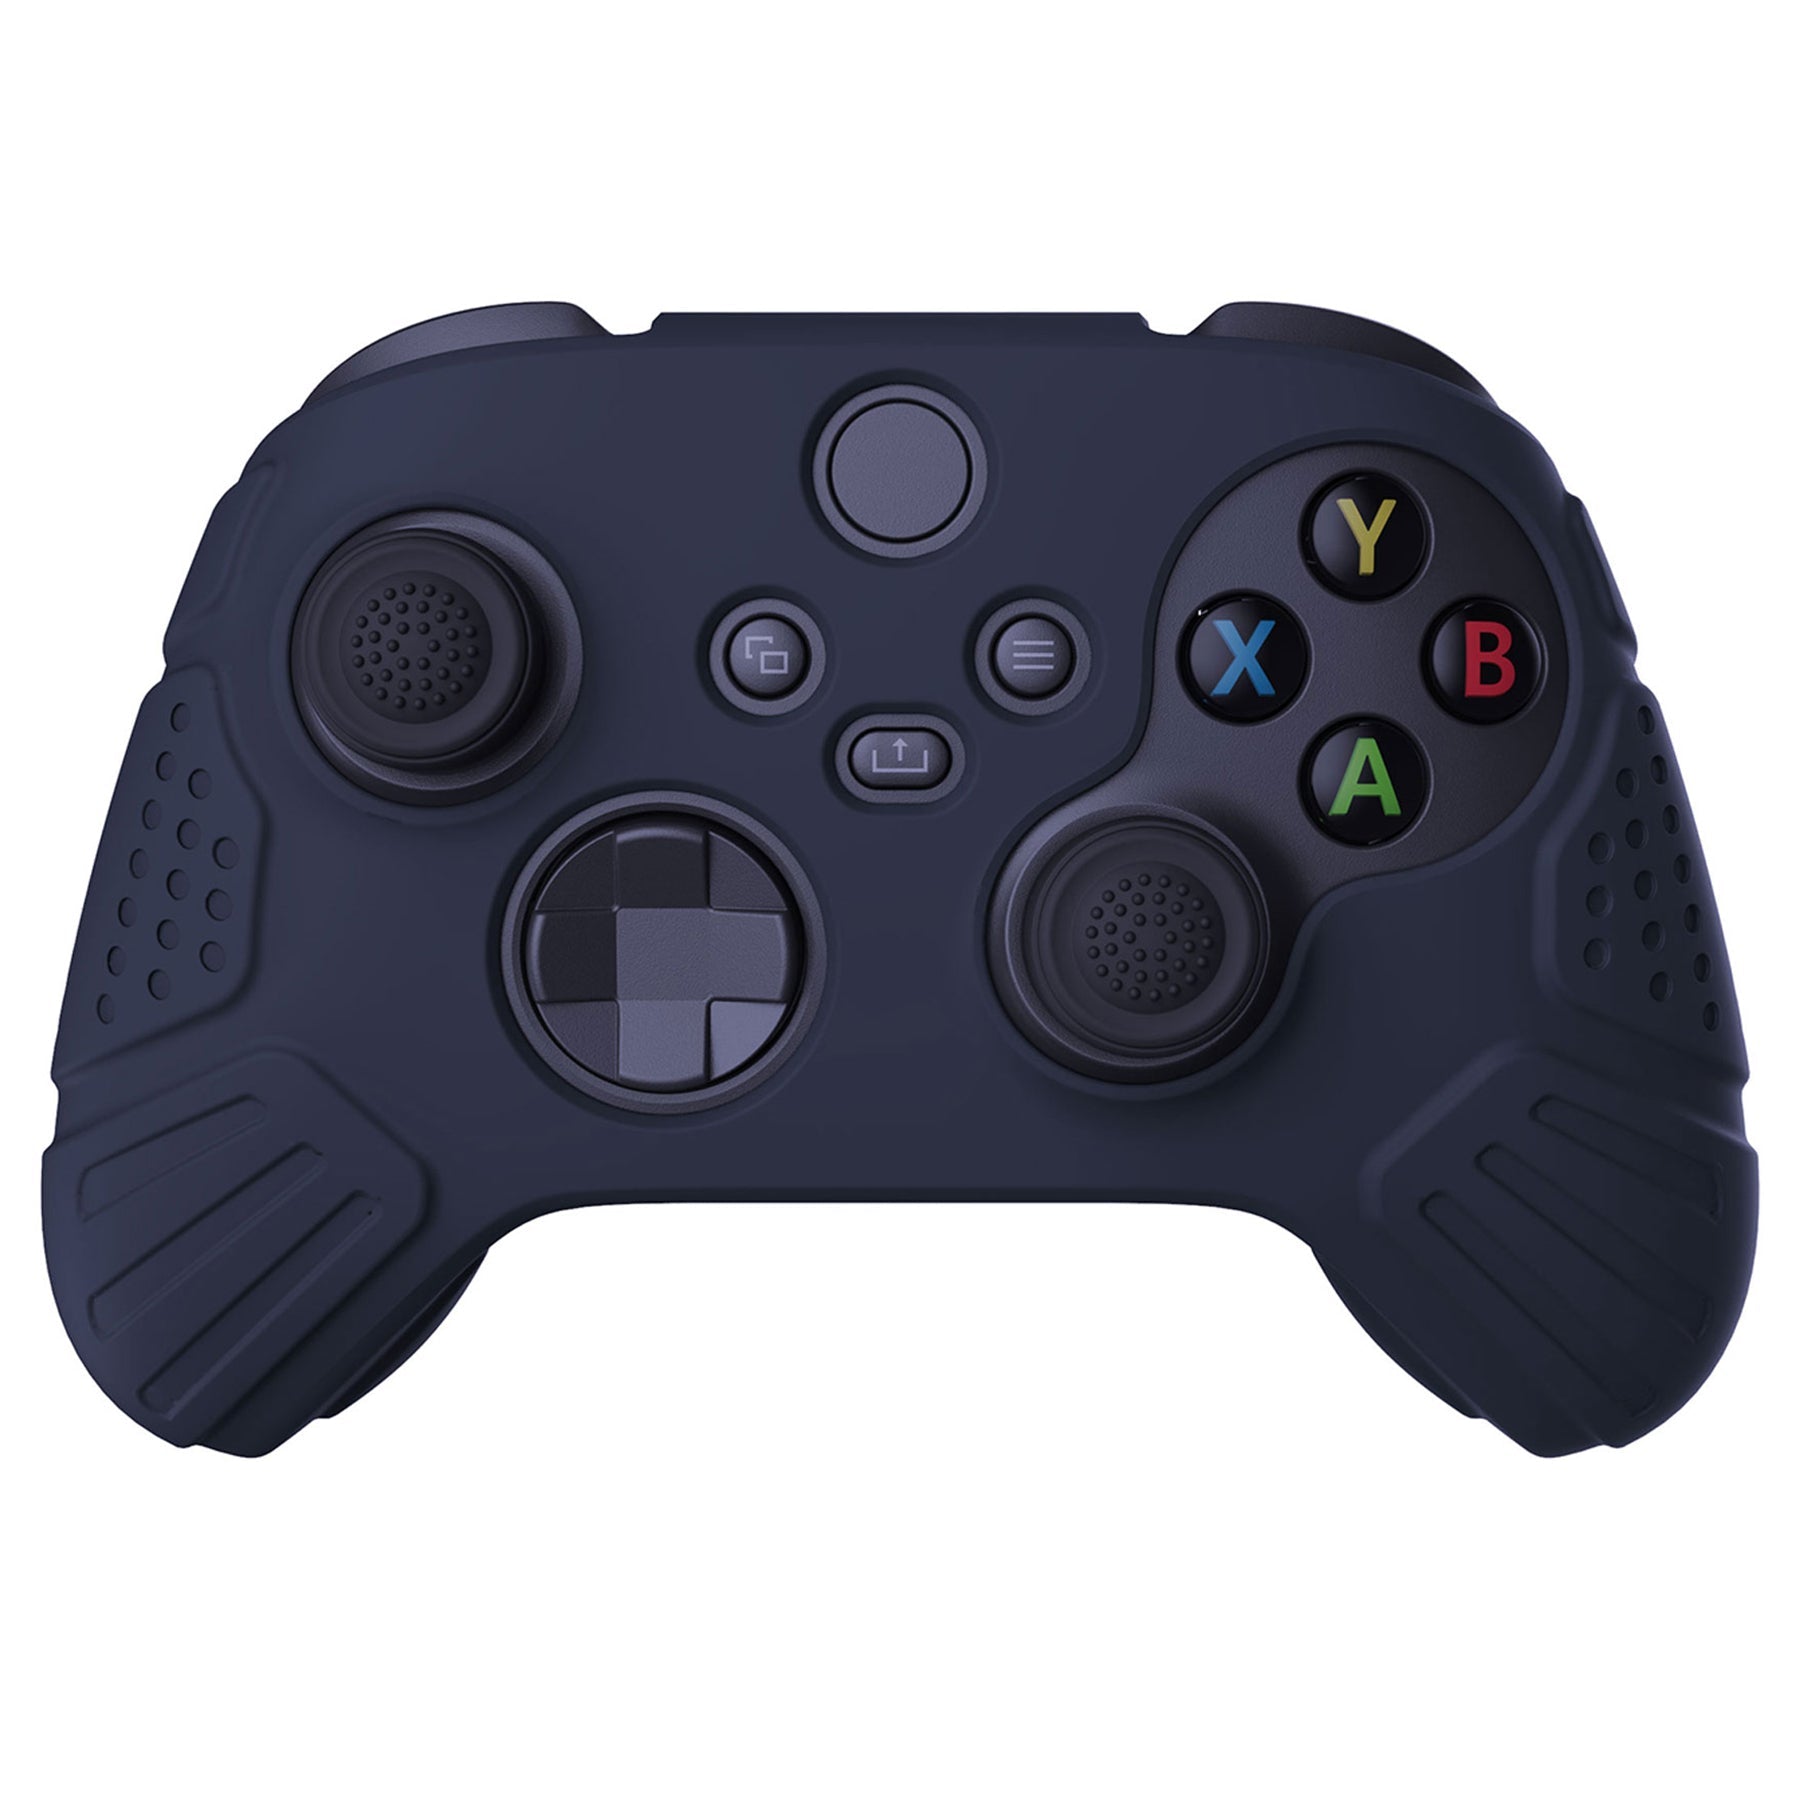 PlayVital Guardian Edition Midnight Blue Ergonomic Soft Anti-slip Controller Silicone Case Cover, Rubber Protector Skins with Black Joystick Caps for Xbox Series S and Xbox Series X Controller - HCX3003 PlayVital